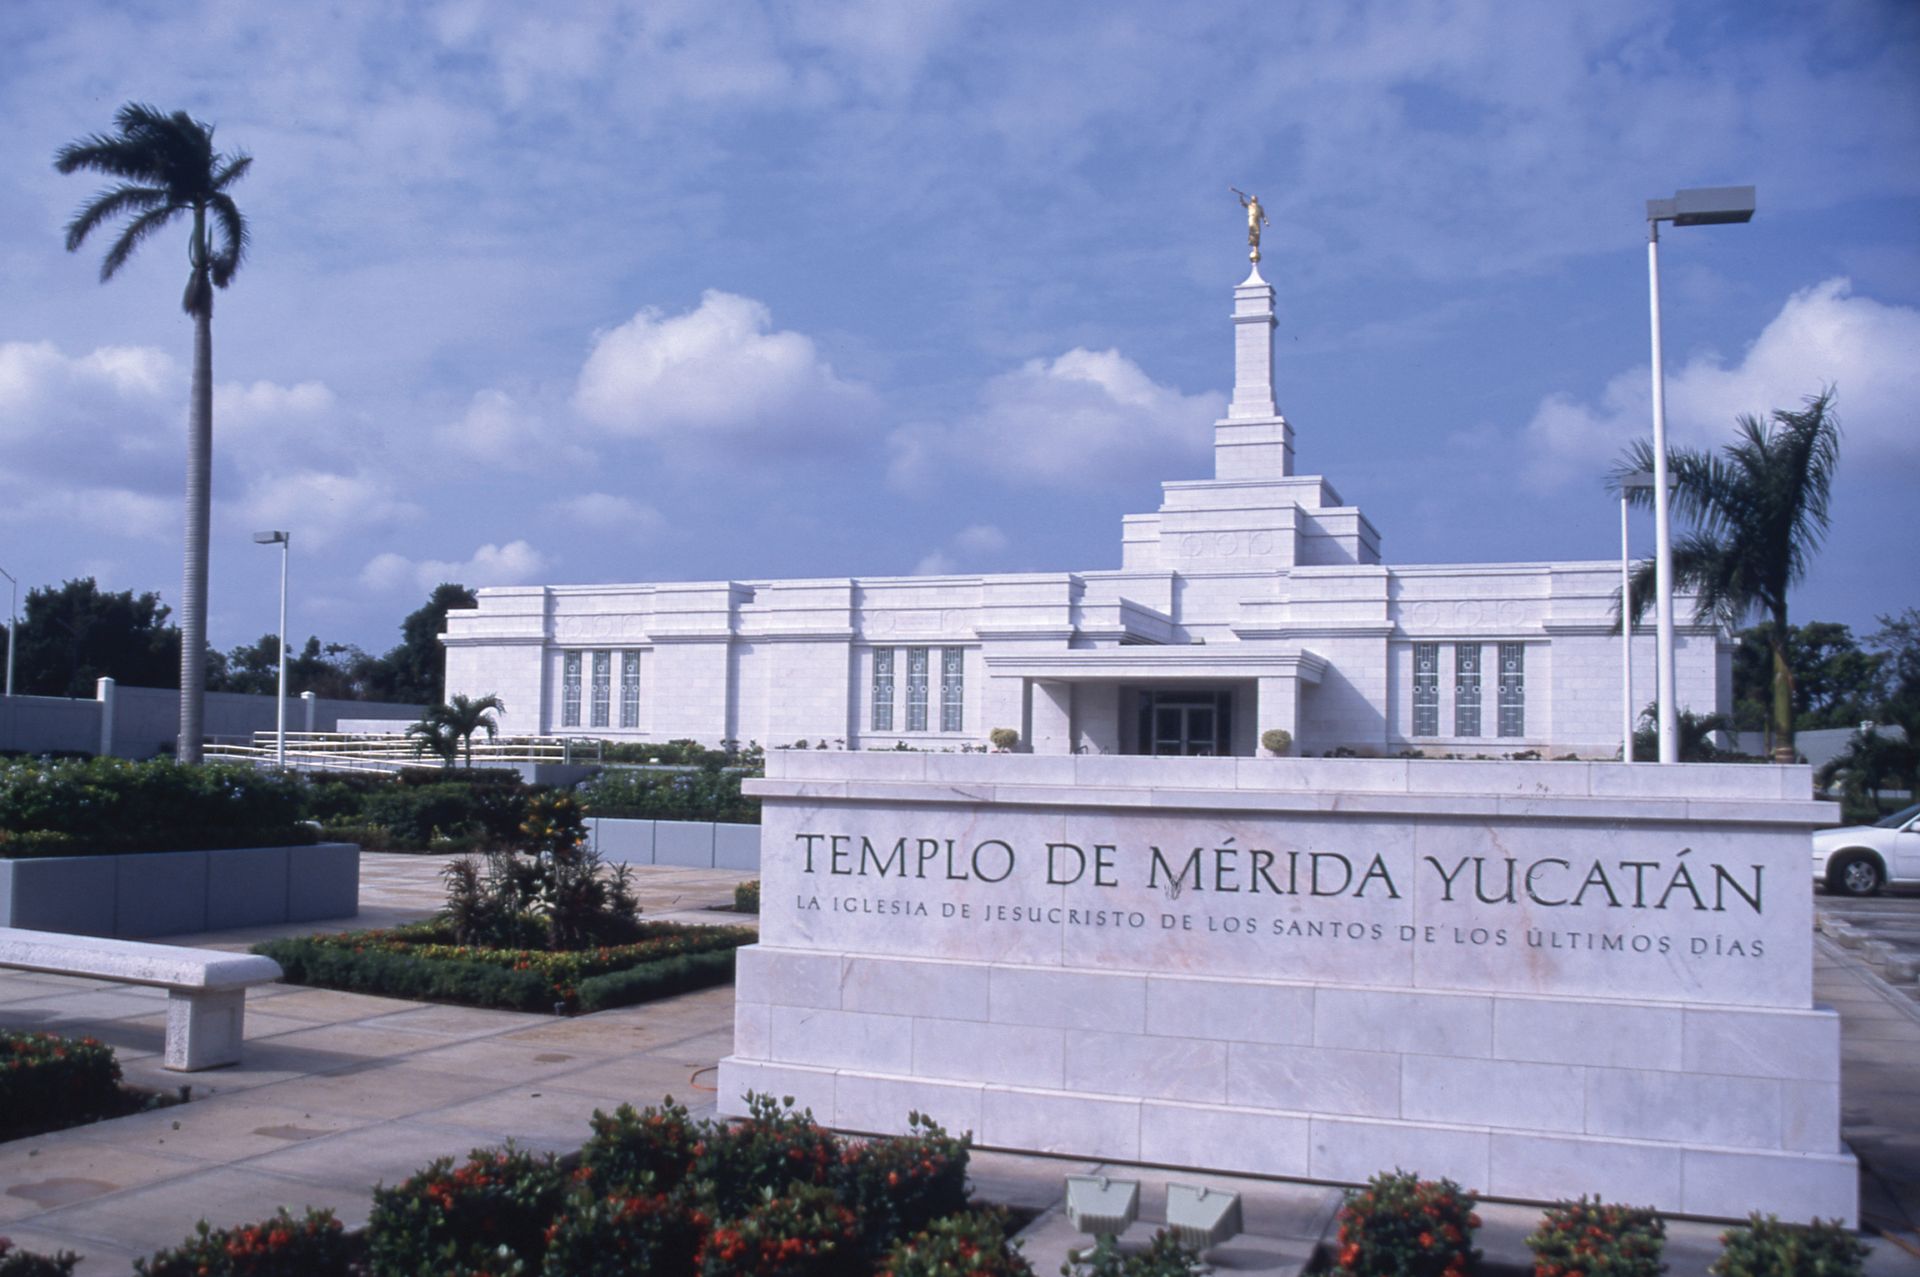 The Mérida Mexico Temple name sign, including the entrance and scenery.